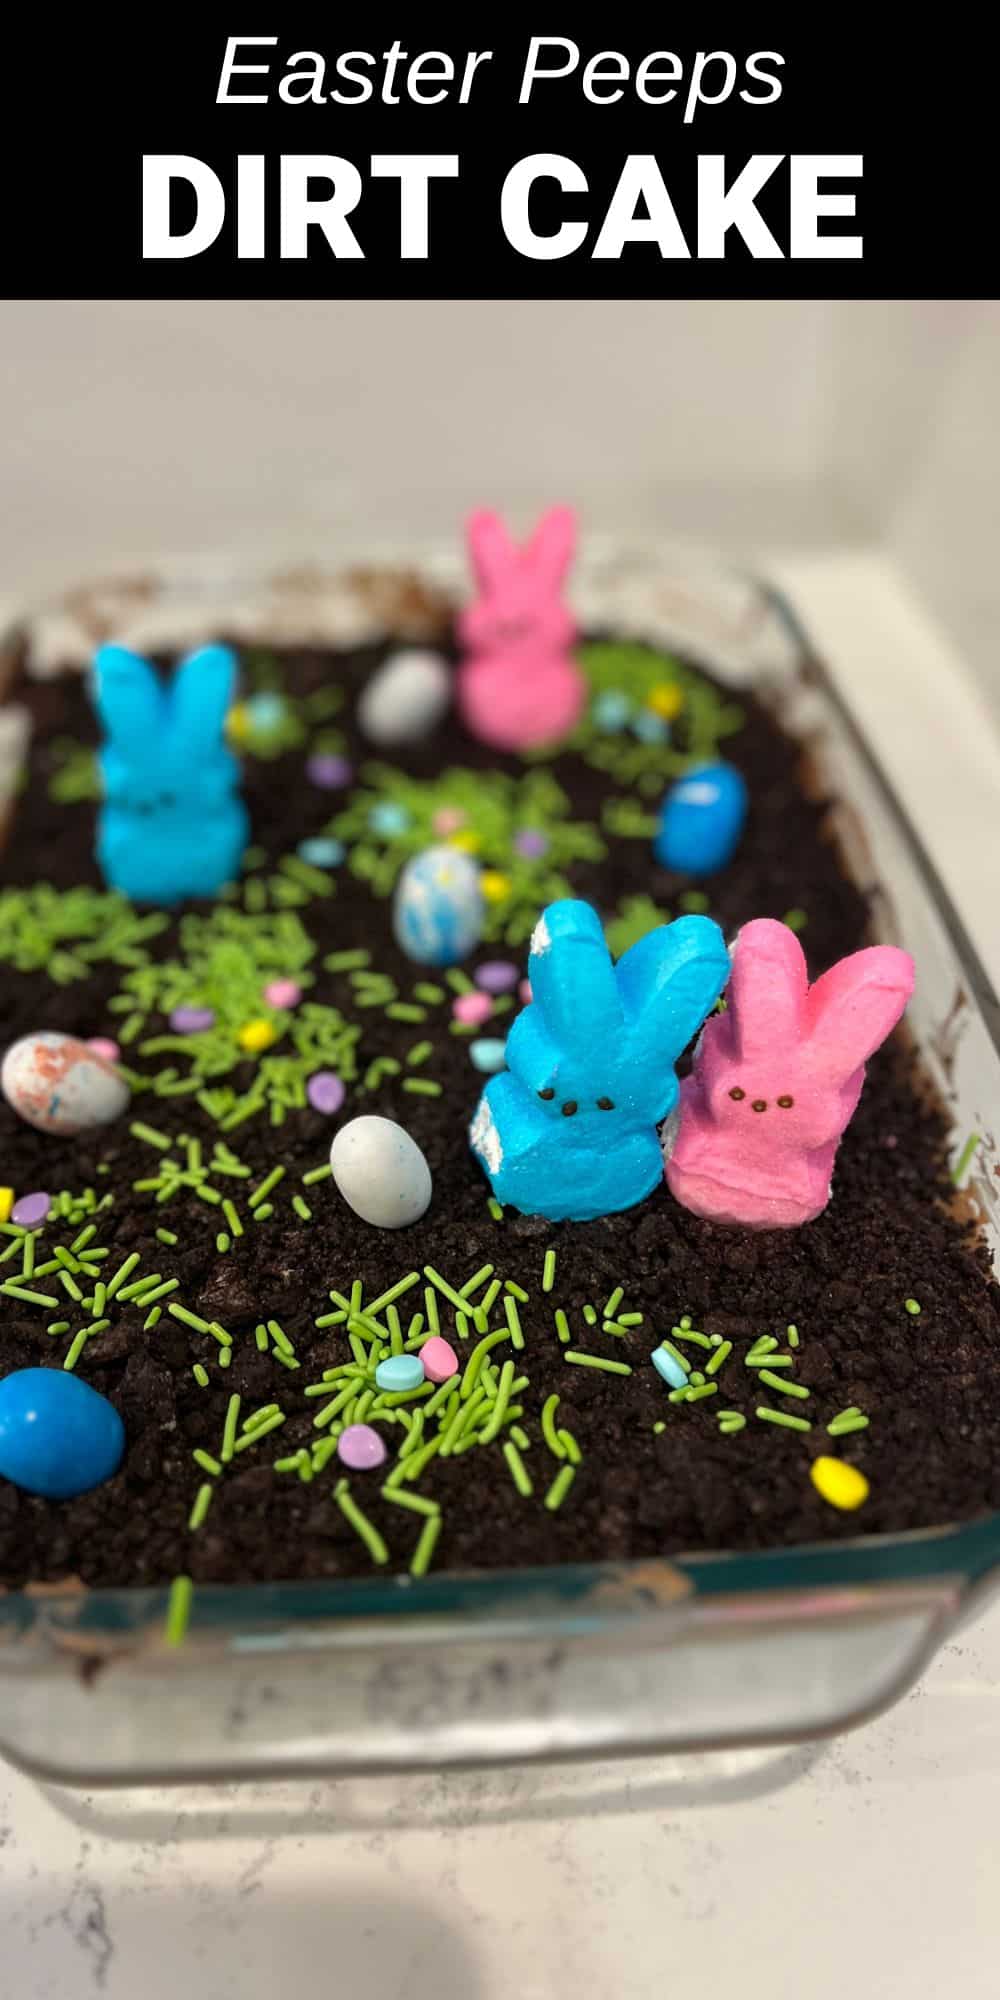 This Easter Dirt Cake is a fun no bake dessert to make for Easter that the kids love. With a crushed oreo crust and fluffy chocolate pudding center, this cake is topped with colorful Spring Easter peeps to make the cutest dessert.